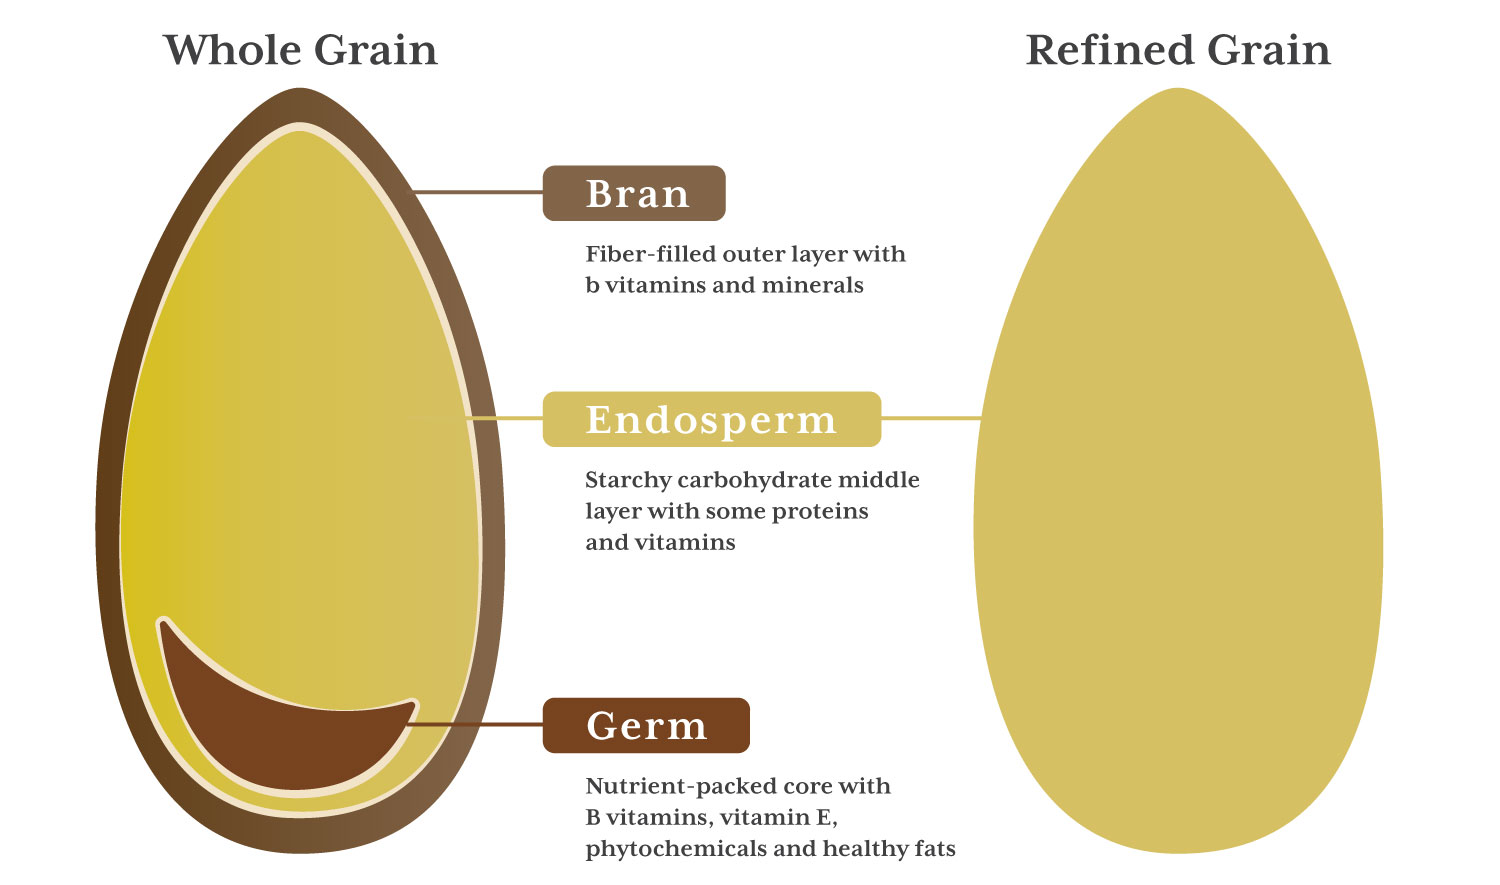 illustration of the difference between whole grain and refined grain